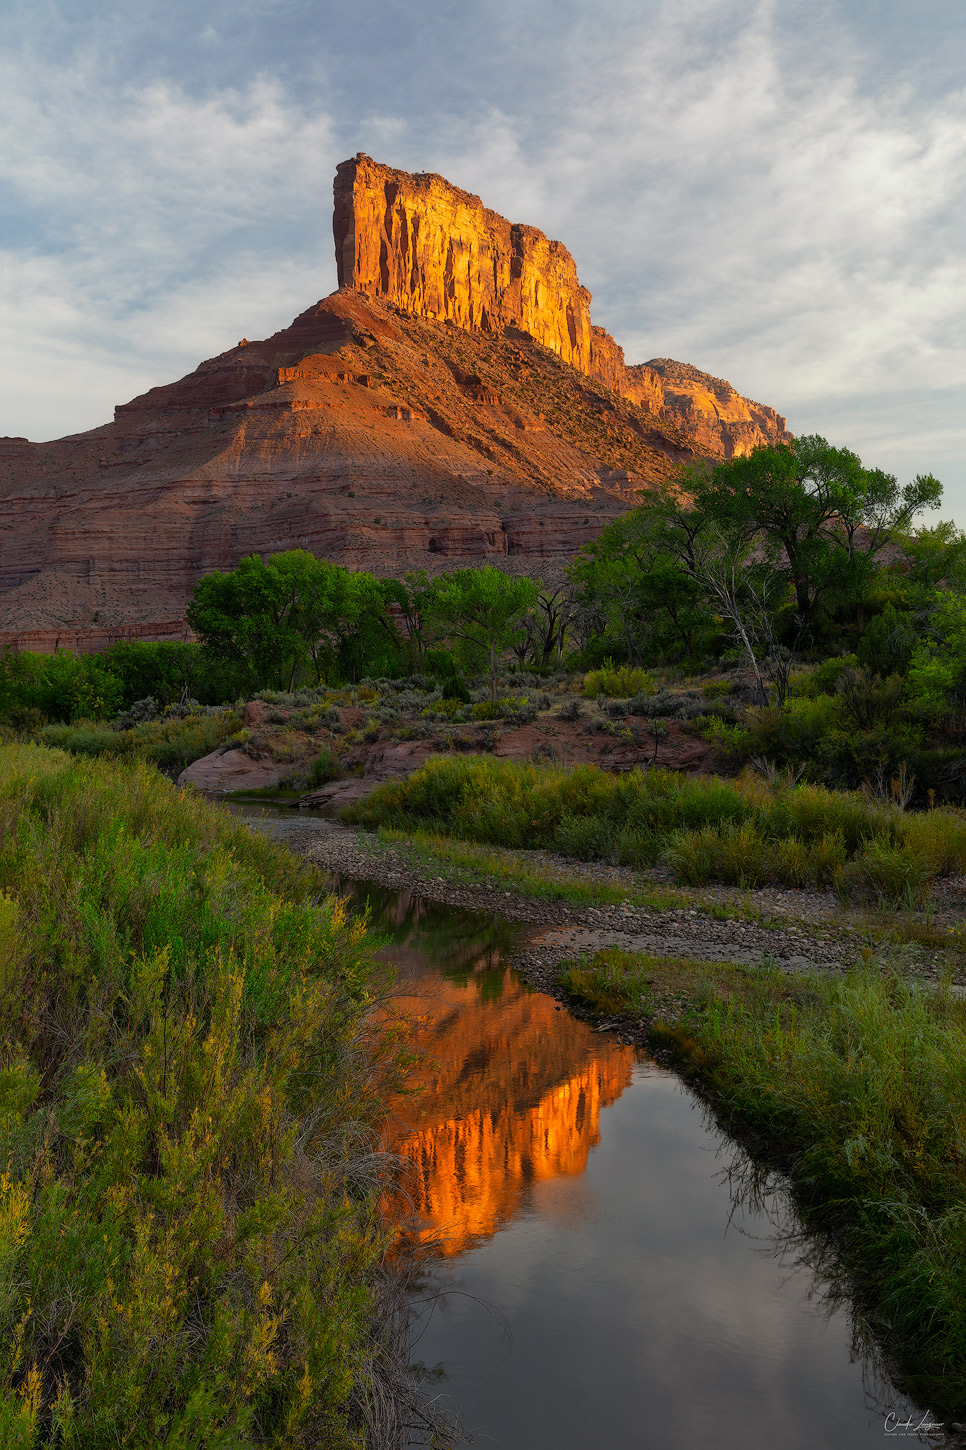 Reflection of Red Rock Formation in Gateway in Colorado at sunrise.